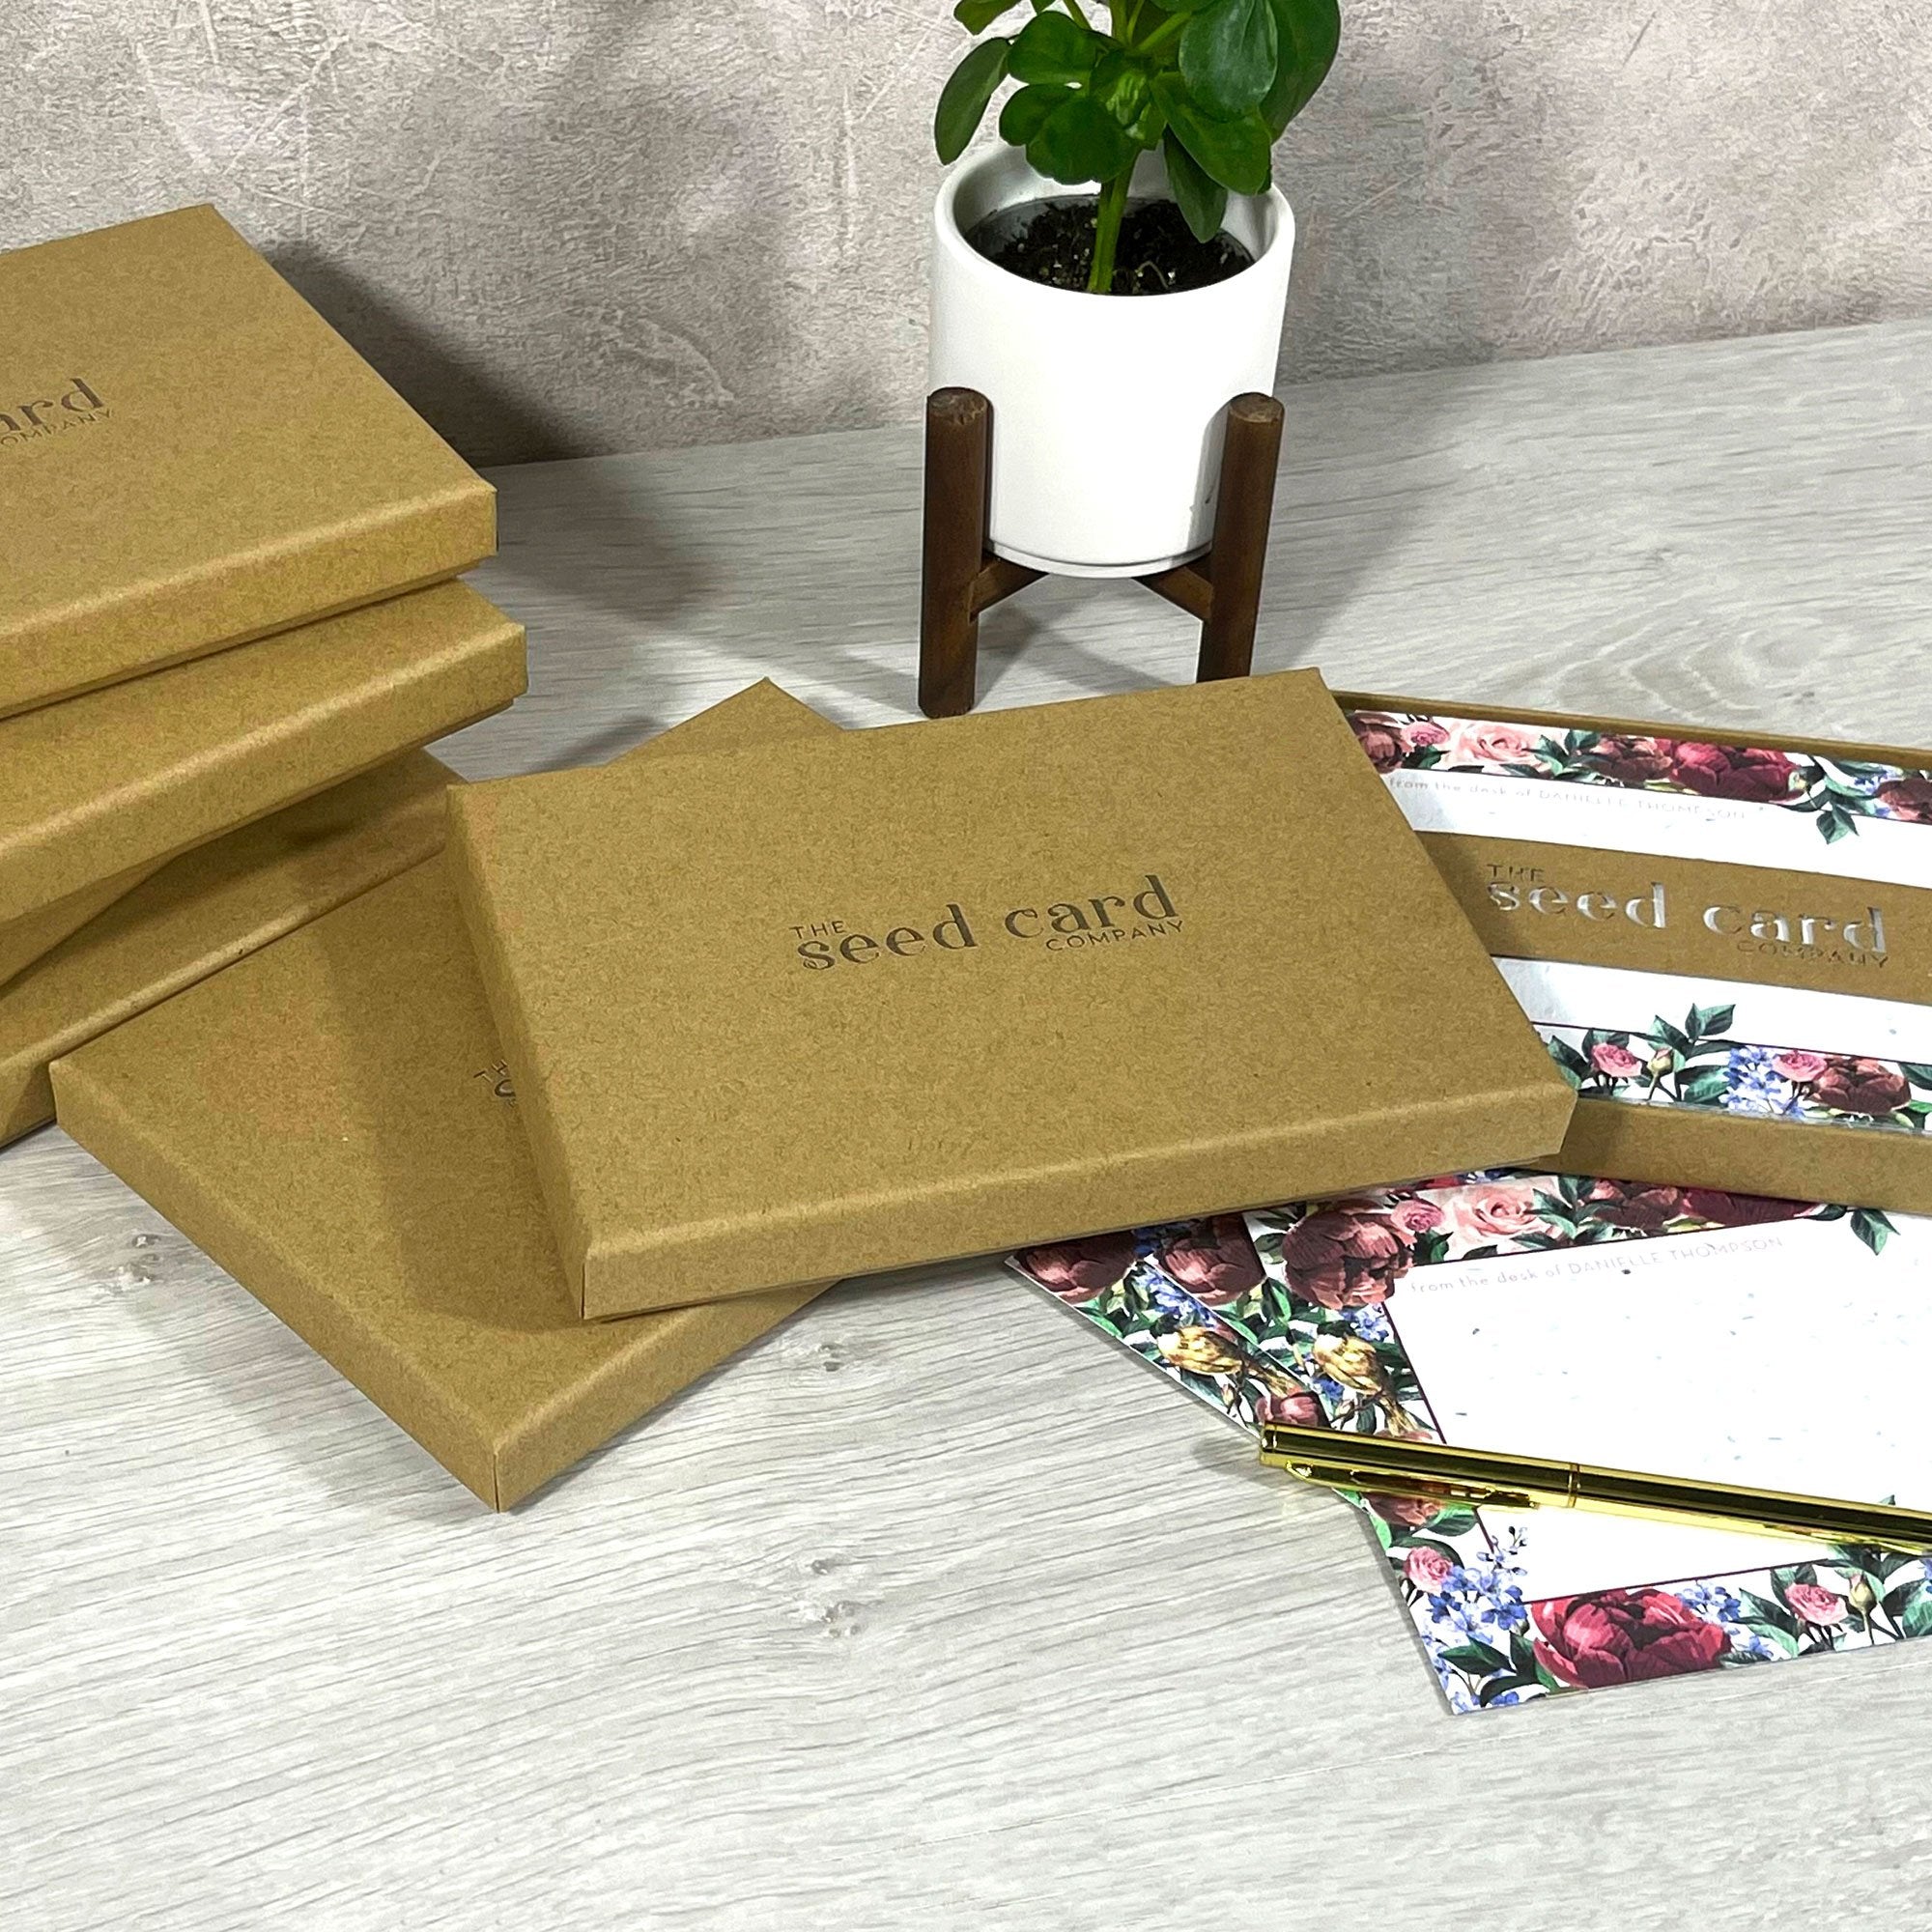 Shop online Forever Susan - 100% biodegradable seed-embedded cards Shop -The Seed Card Company